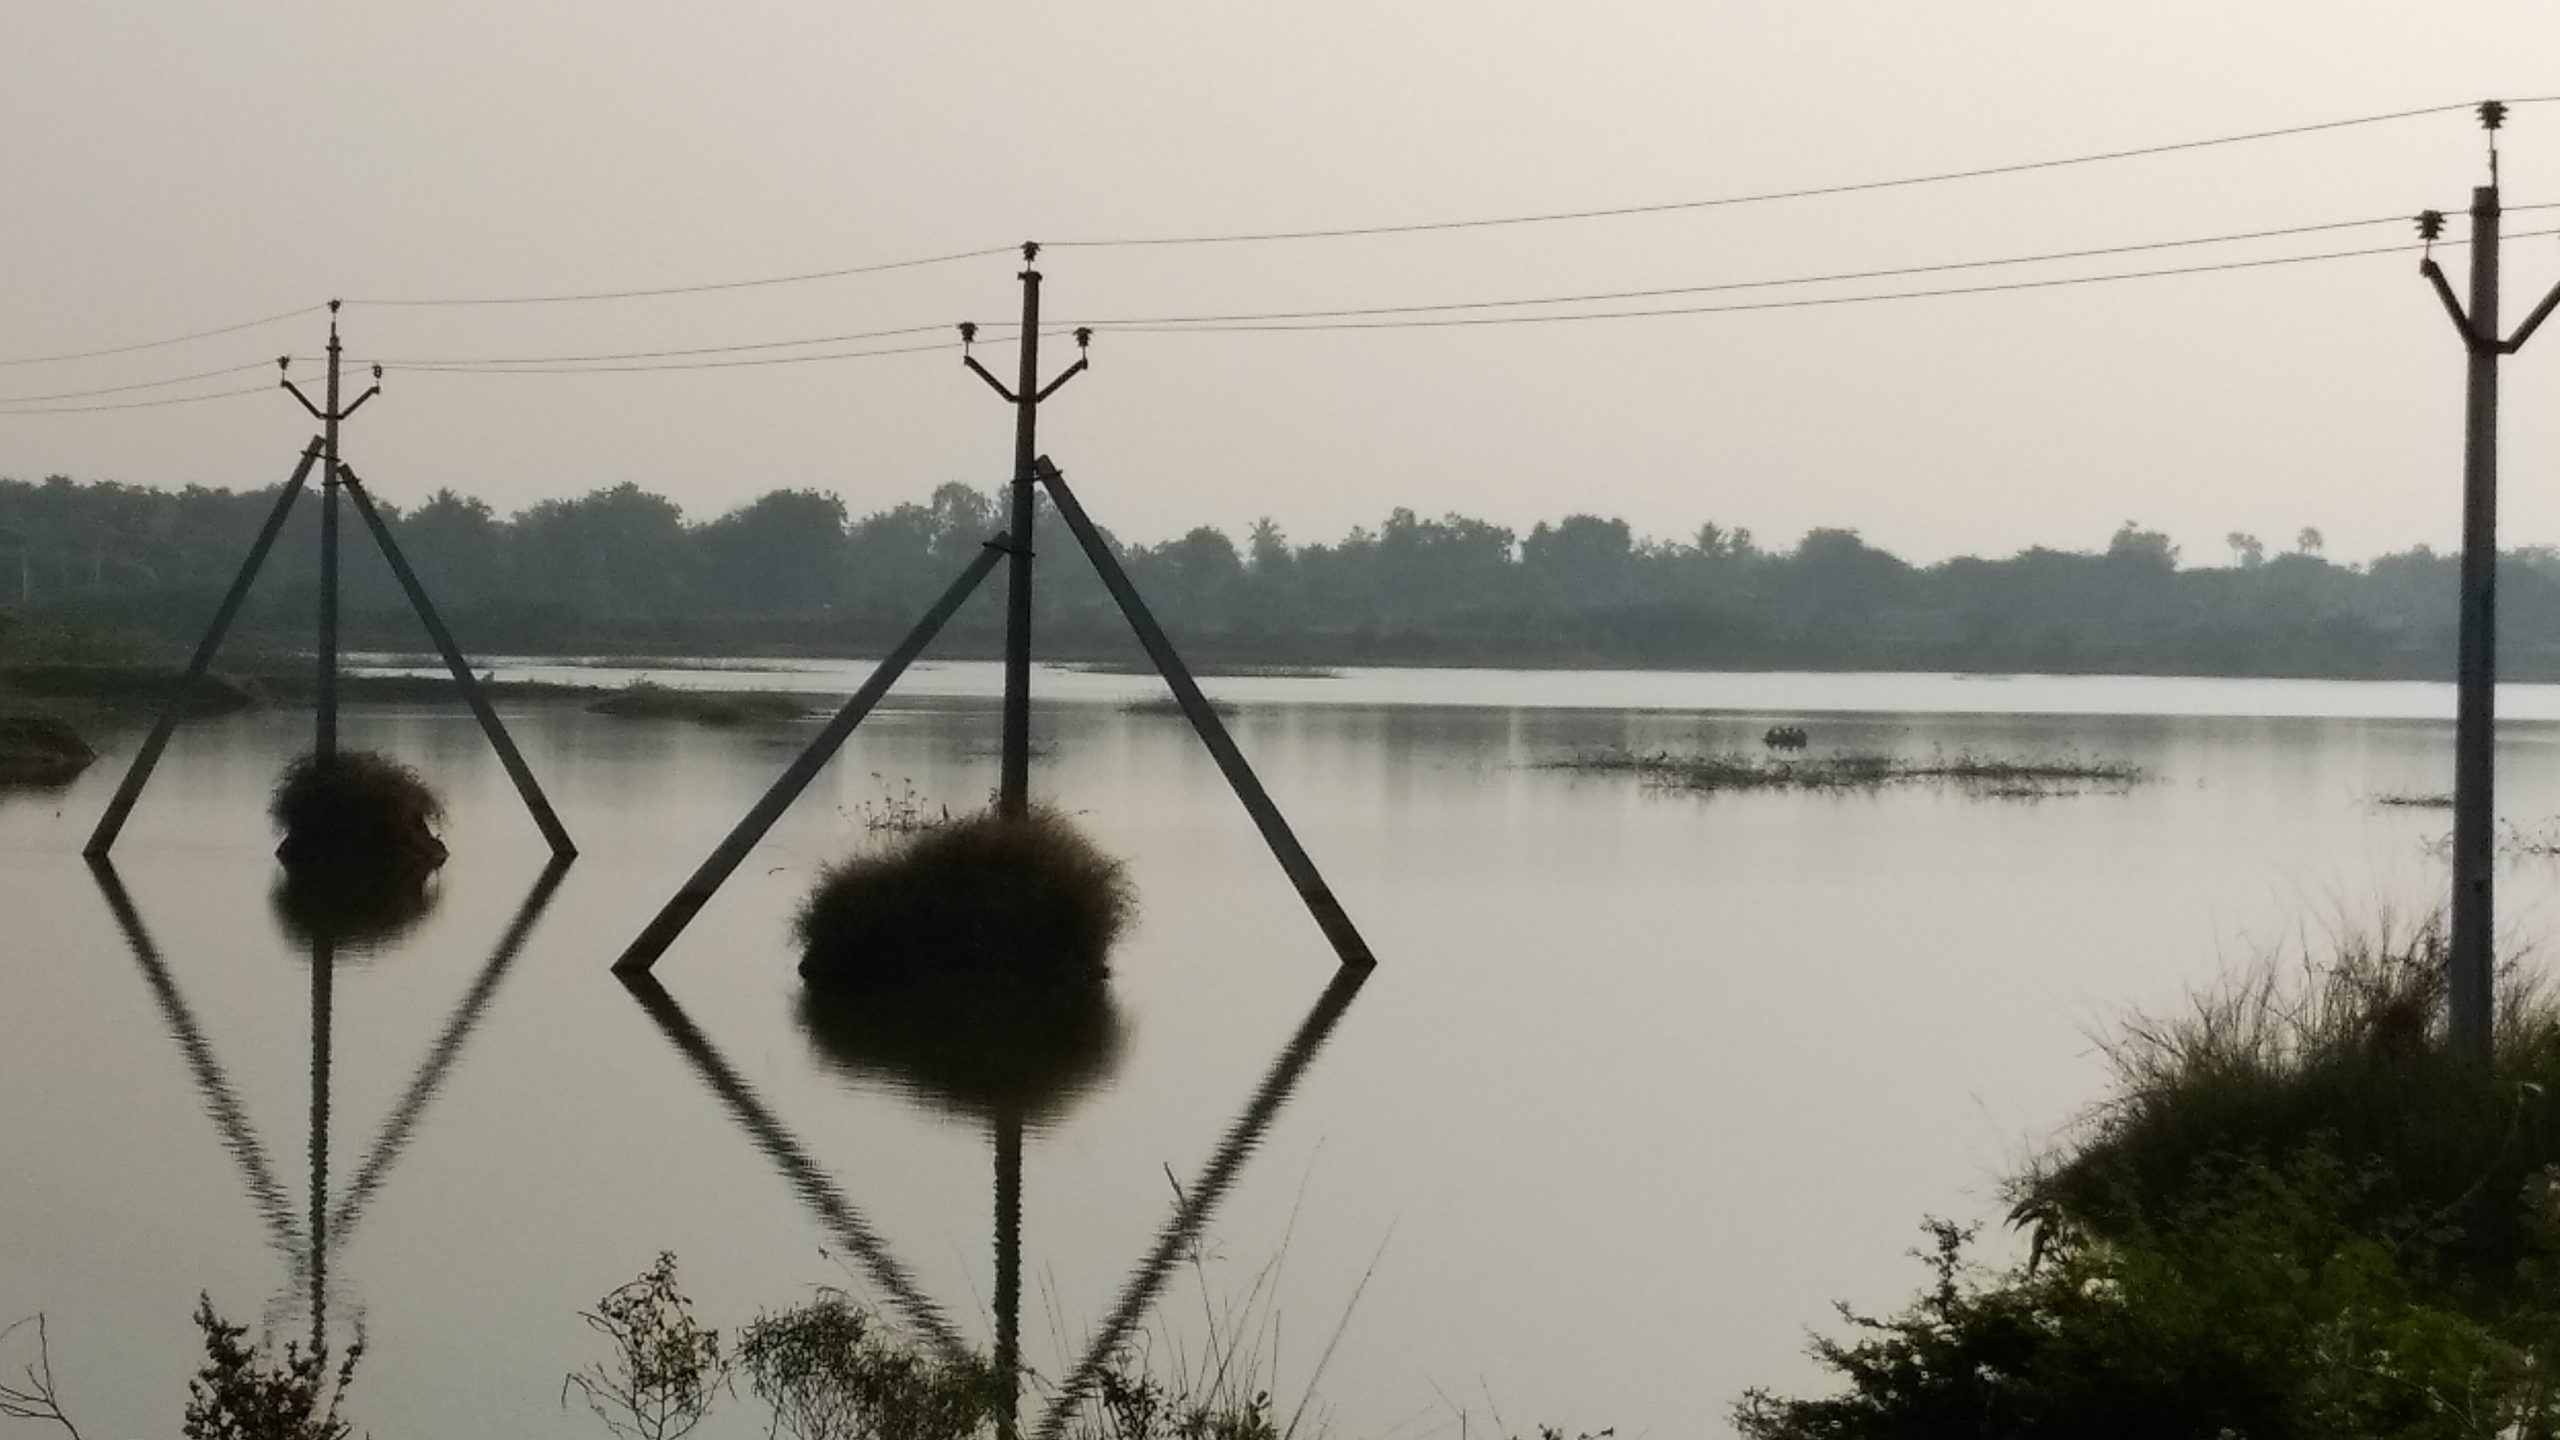 Electric poles in a lake